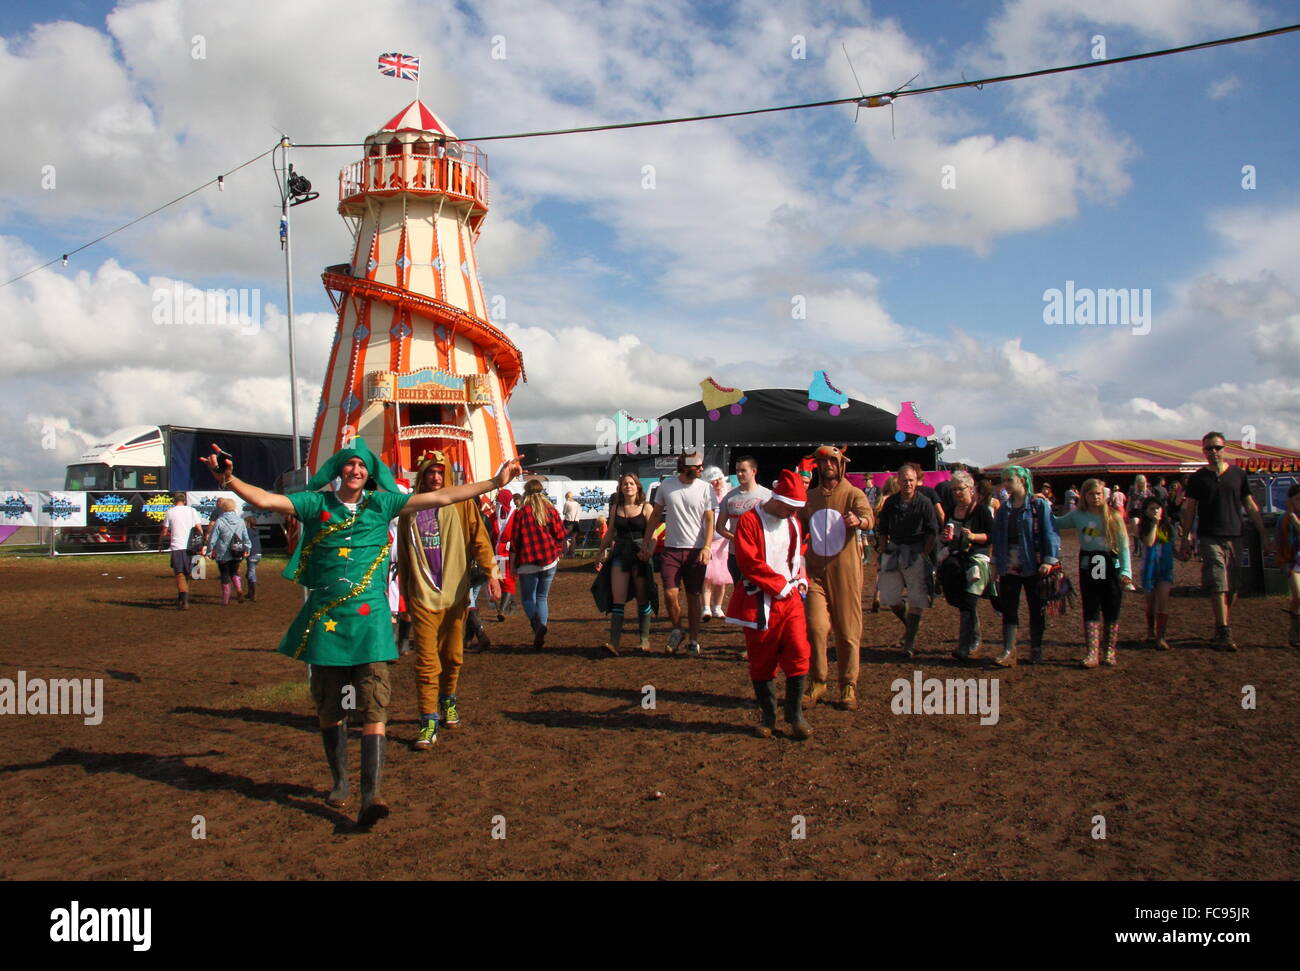 Festival goers embrace the annual fancy dress theme in a muddy field at the Y Not music festival in the Peak District England UK Stock Photo